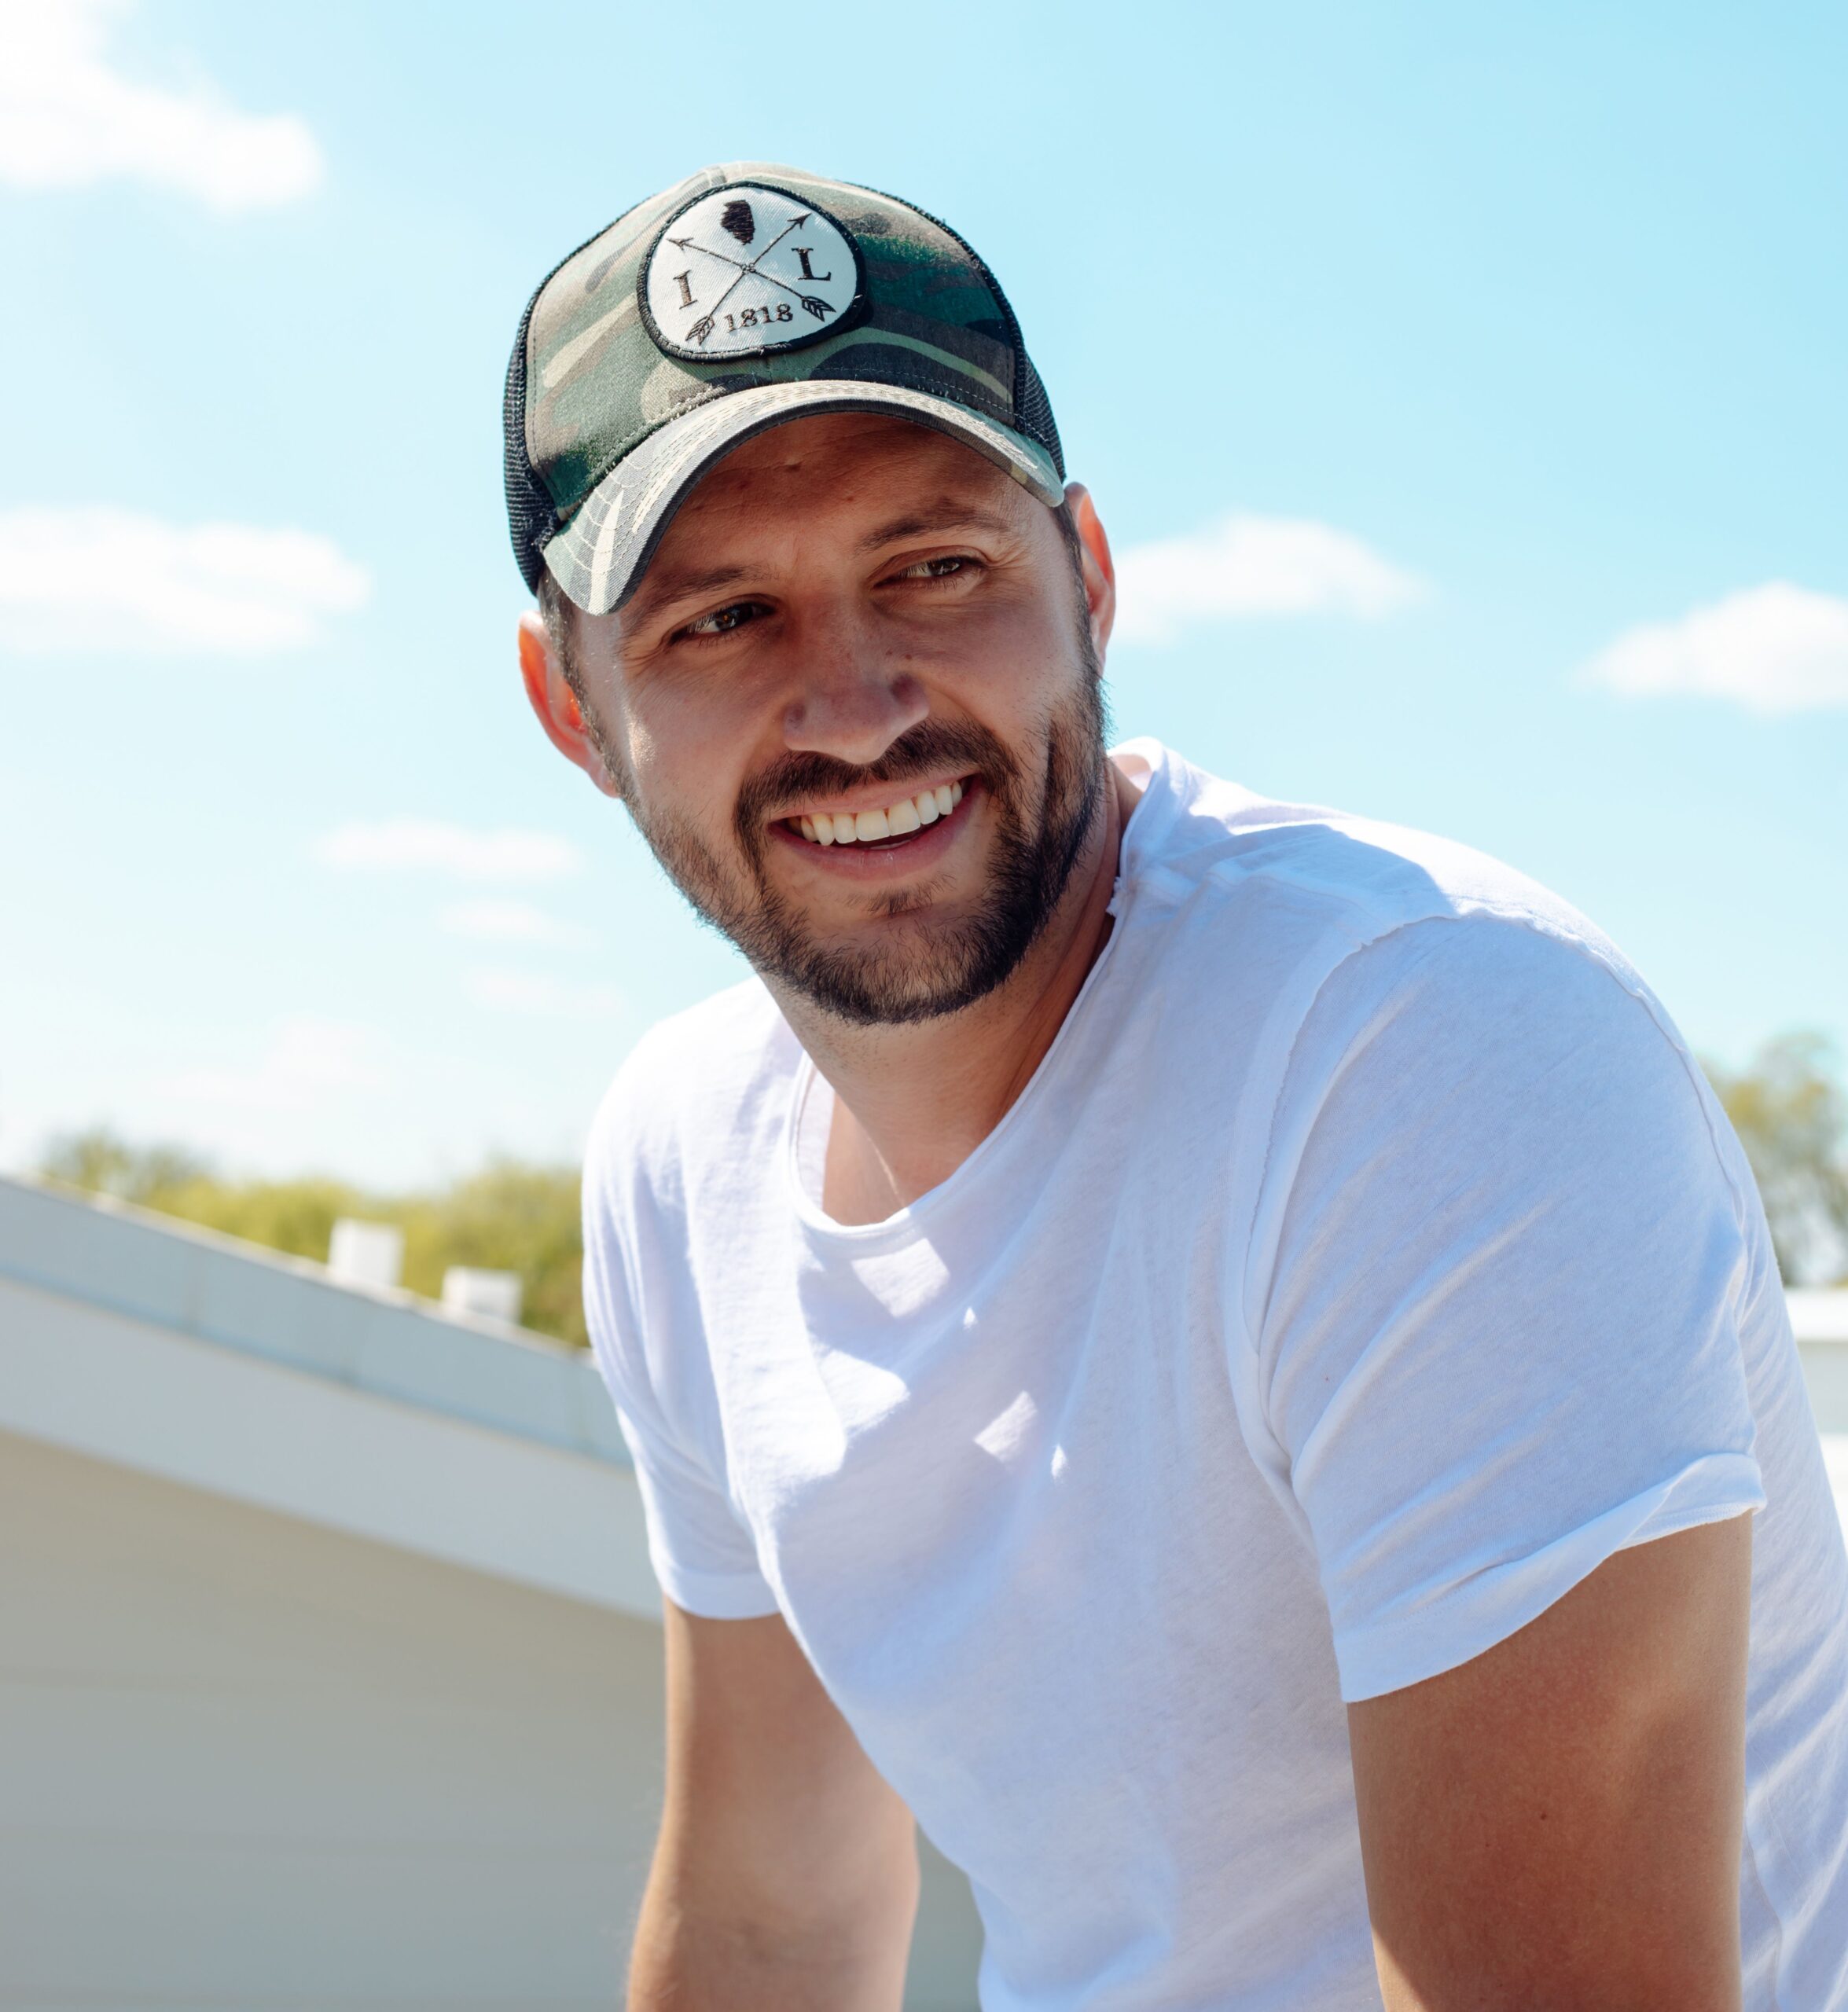 Drew Baldridge Opens Up About His Rise To Stardom As An Independent Country Artist And New Single, “Wontcha Come Back Home” (Exclusive)